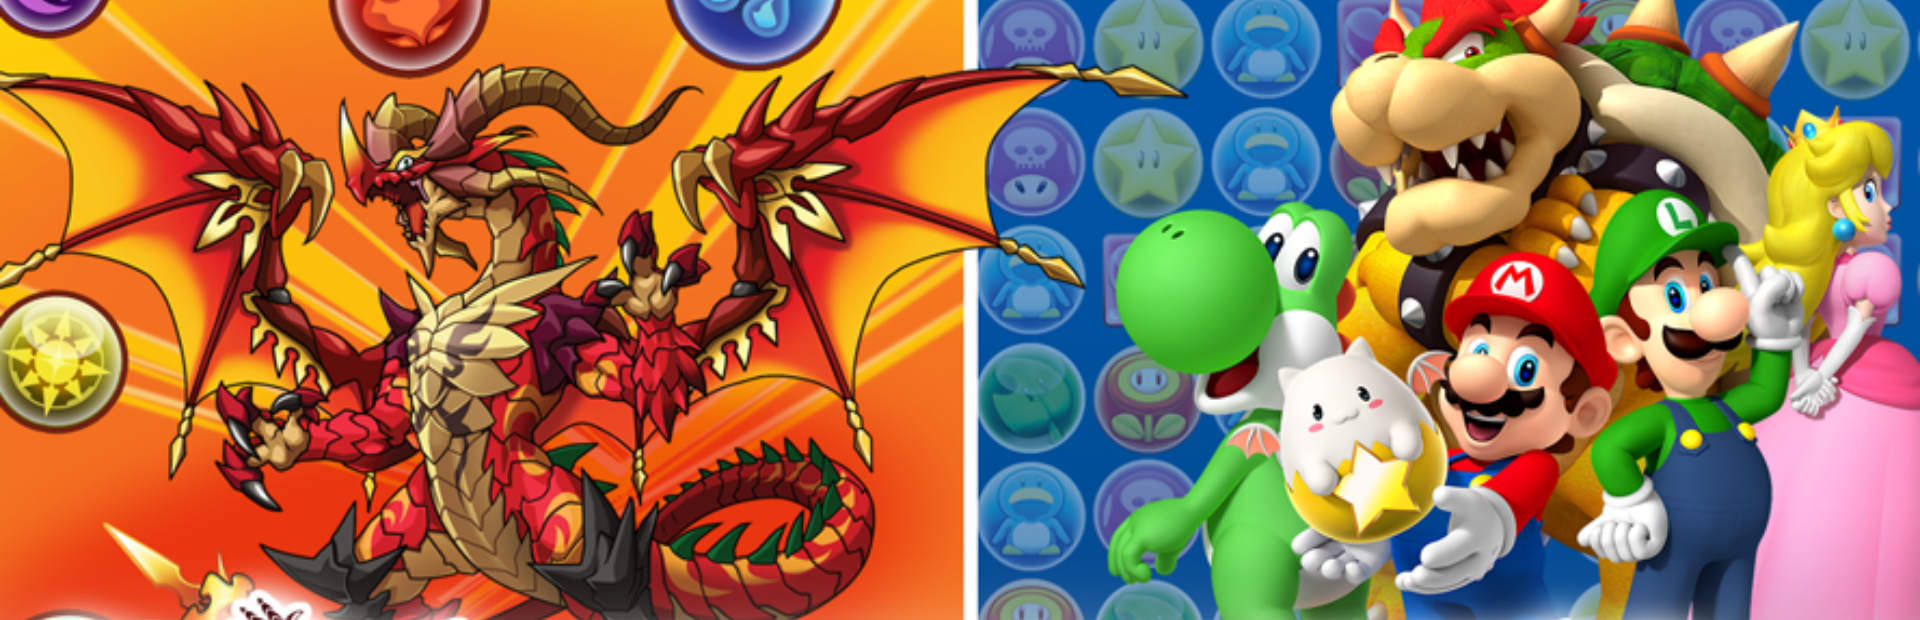 Puzzle & Dragons: Super Mario Bros. Edition demo available this month -  Polygon